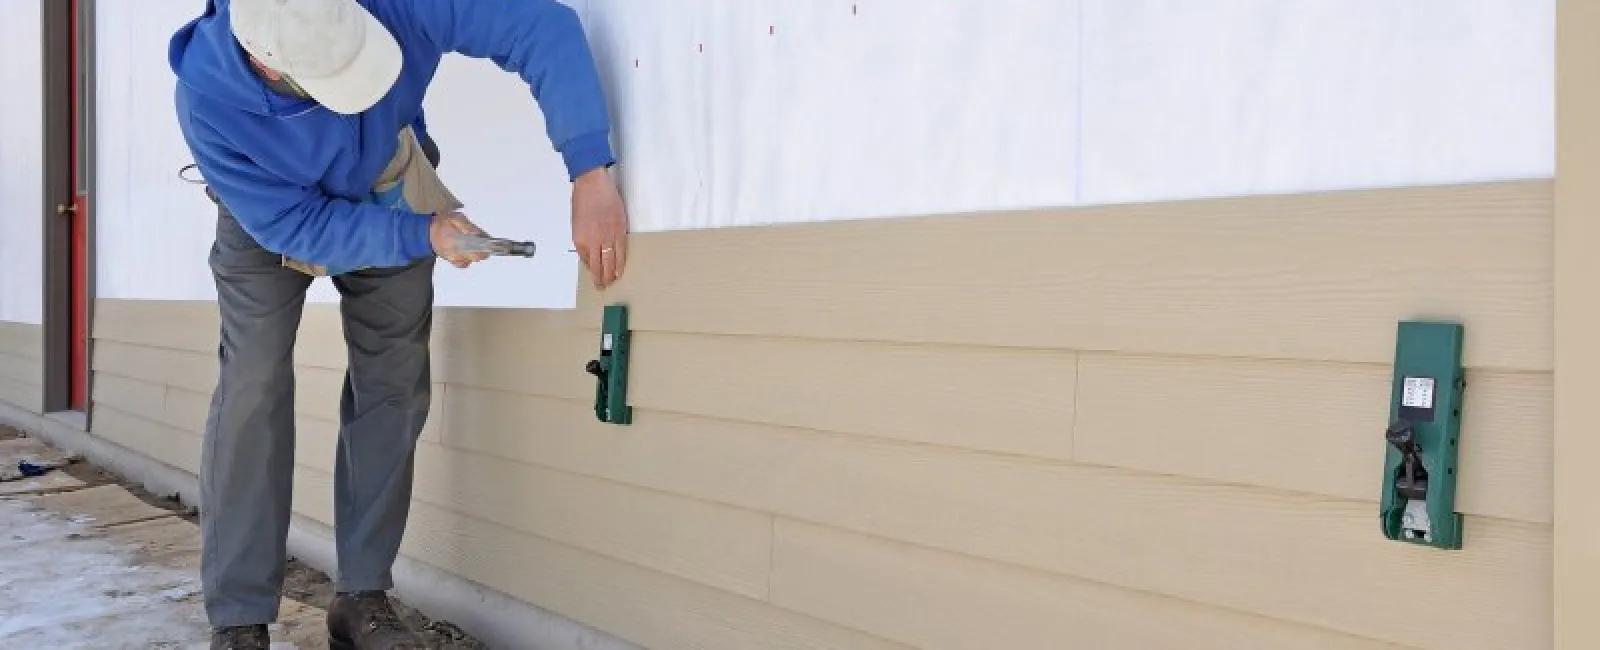 Warped Cement Siding: How to Deal With the Problem